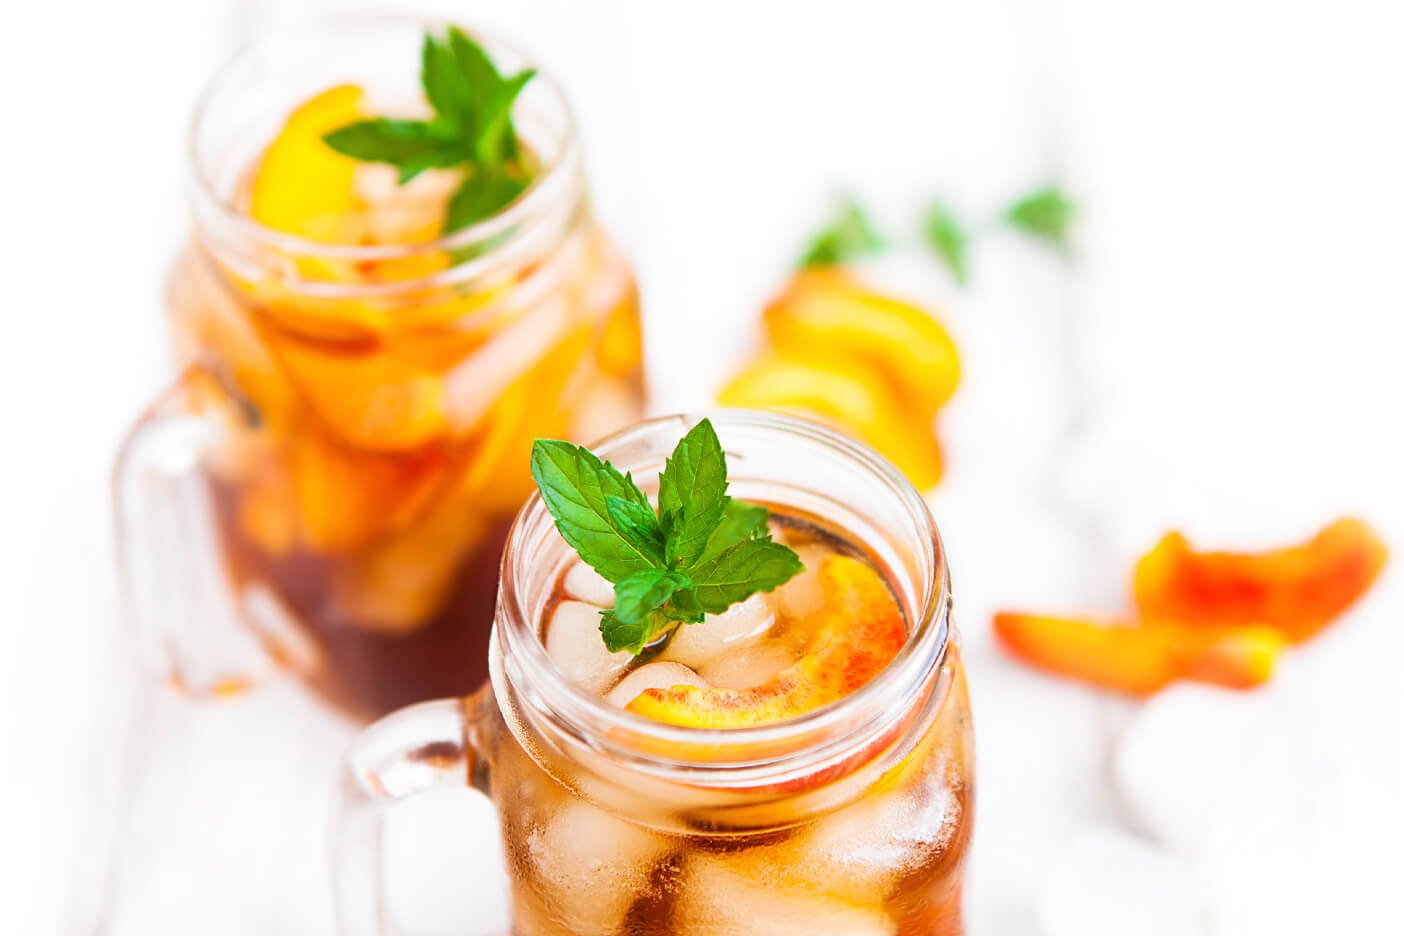 How to Make the Perfect Iced Tea